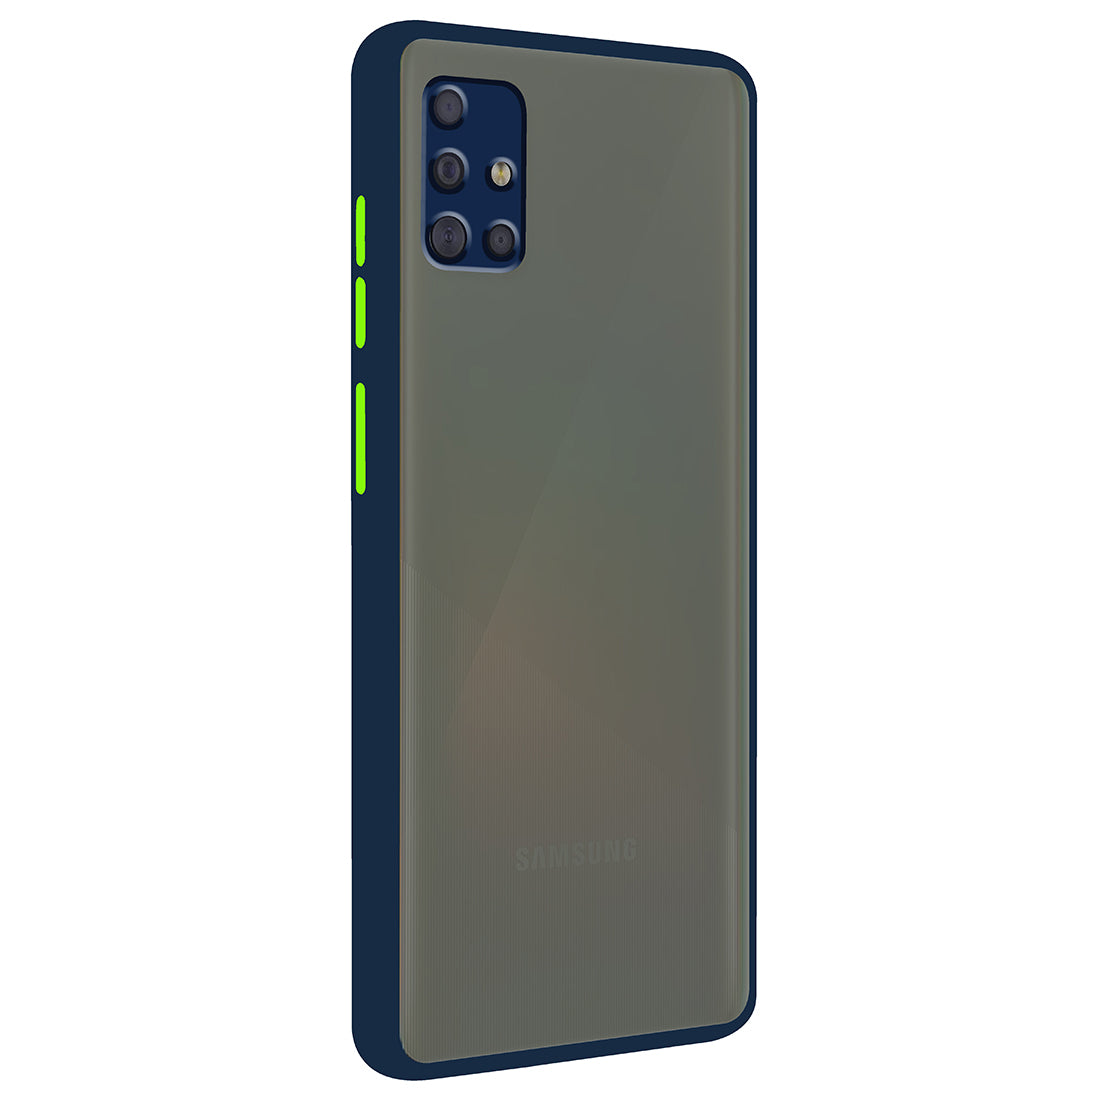 Smoke Back Case Cover for Samsung Galaxy A51